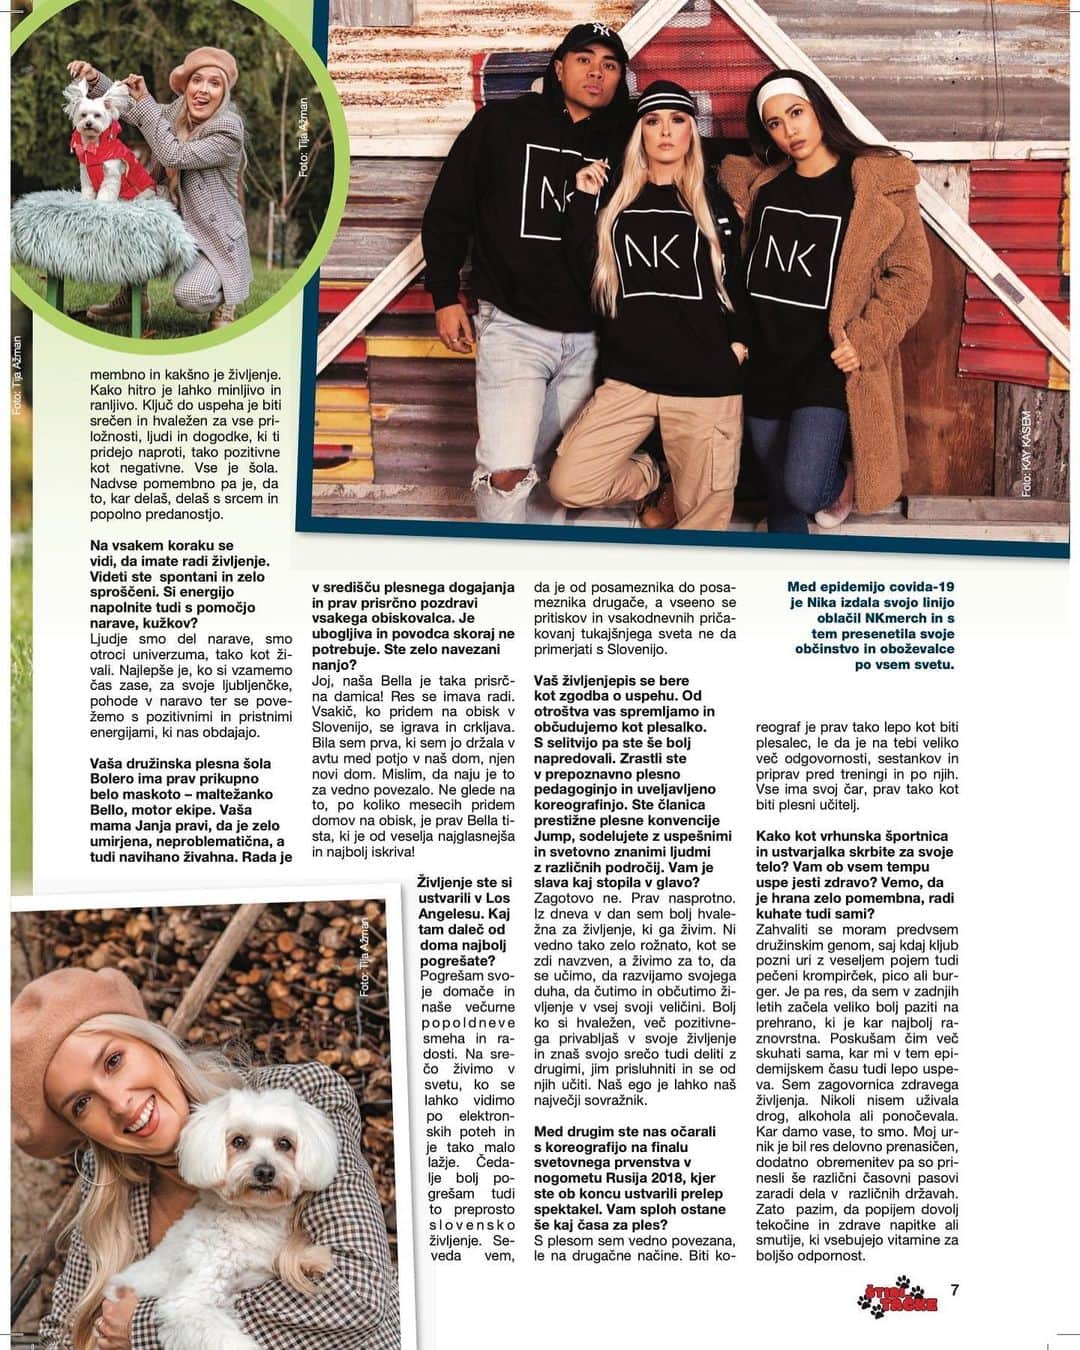 Nika Kljunさんのインスタグラム写真 - (Nika KljunInstagram)「Ste jo že kupili? 🤪💁🏼‍♀️📸 The December - January issue of “Štiri tačke” Slovenian 🇸🇮 magazine is OUT now‼️👱🏻‍♀️🐶 . “Štiri tačke” is a magazine all about our furry friends, & translates to “four paws” 🐾 in my language! ❤️😄 . It is always so much fun and an honor to be on the covers of magazines in my country. 🙏🏼📰 I cherish every opportunity to share stories with my amazing supporters. But this cover and interview ☝🏼 was extra special to me, because I am truly such an animal lover! 🥰🐆🦘🐩🦮 . In this interview, I talk about how much more beautiful life is when we open our hearts to animals. I genuinely believe that we are all meant to be connected 🙏🏼🙇🏼‍♀️🌍🐶🐱🐴🦋🦒🐠🐘🐬🦜. They are just as much an important part of nature, as we are.  Mother Nature speaks in many ways, and we should always listen 🙇🏼‍♀️✨ . I was also happy to have the opportunity to talk about the importance of taking care of yourself, mind, body and spirit. All great things start with gratitude, positivity and the unwavering commitment to designing your own life, rain or shine. 🌧☀️ WE HAVE THE POWER!  #WarriorMentality 🙏🏼❤️💪🏼 Always be and spread light, my loves.  . Thank you Nataša Bešter and Jerca Pokorn for having me in your magazine. 🙃 . Thank you to my auntie @tijaazman_photography 📸 for snapping these great pics! 🙏🏼✨ Always on point. Our family dog Bella is a little star now!! Haha #lovemyfamily 😘 . Also thank you another family member @lukaazman for capturing me and Jacky in Los Angeles (these photos means more than you know 🥺) & thank you @mrkaykasem for my #nkmerch photos.  #magazineoutnow #slovenia #sloveniangirl #animallover #ilovewhatido #gratitude #nikakljun #animallife #animalphotography #animalinstagram #kuzkogram #hišniljubljenčki #nikakljunchoreography #bolerodance #bolerodancecenter #dancelife #pawsitivevibes」12月8日 4時13分 - nikakljun